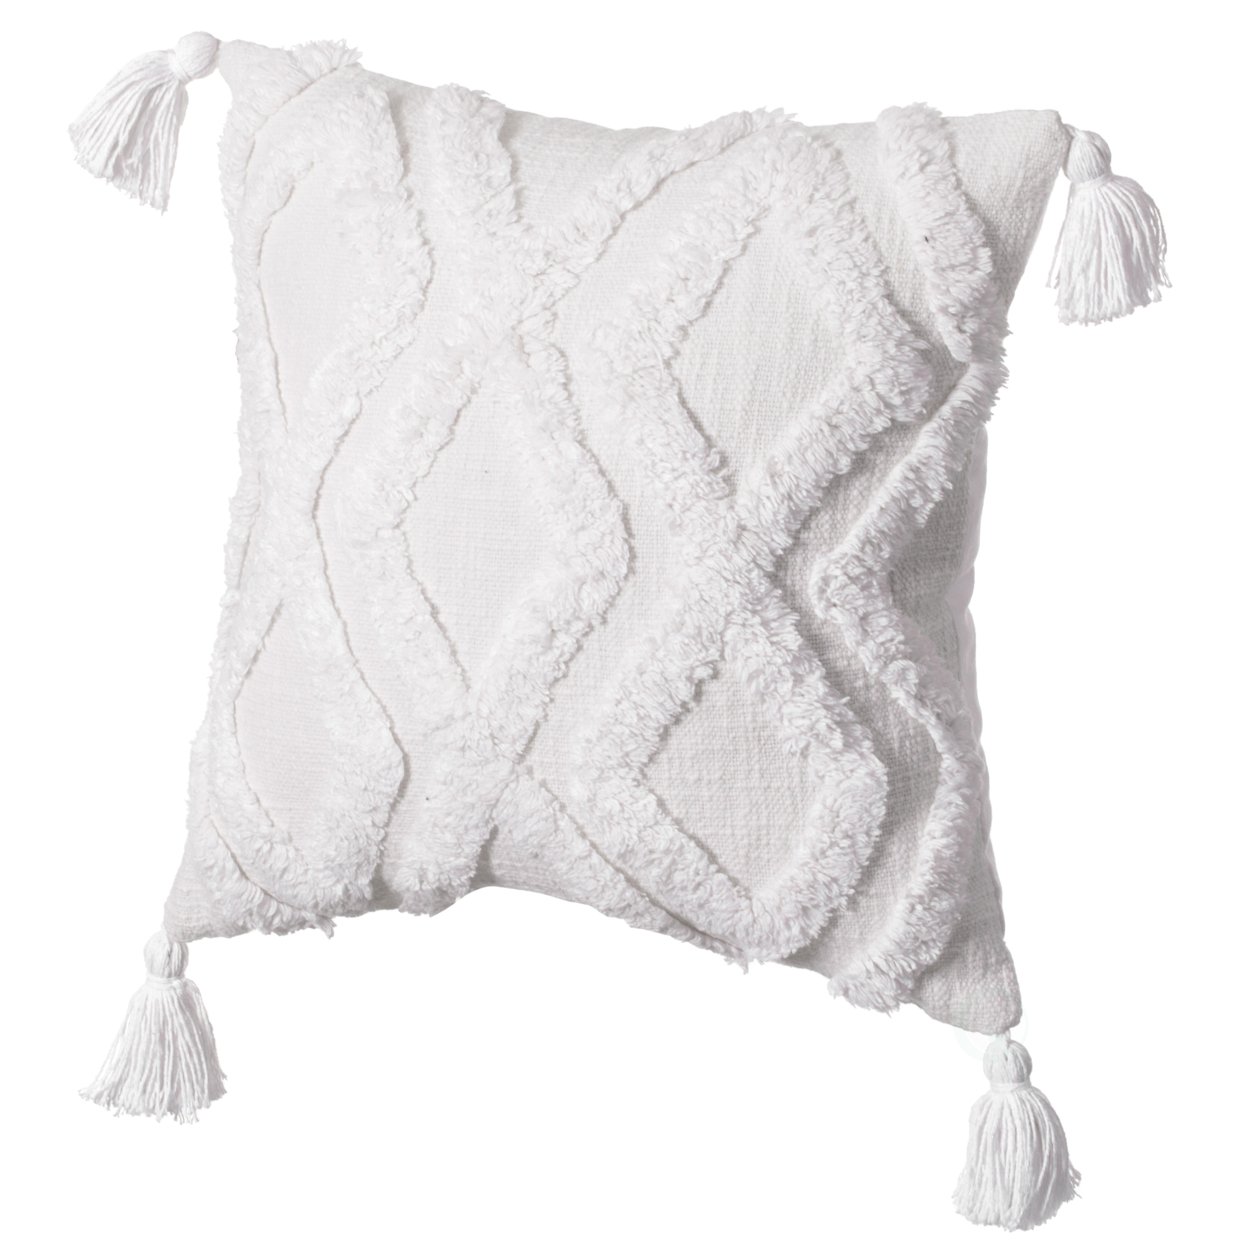 16 Handwoven Cotton Throw Pillow Cover With White Tufted Patterns And Tassel Corners - Large